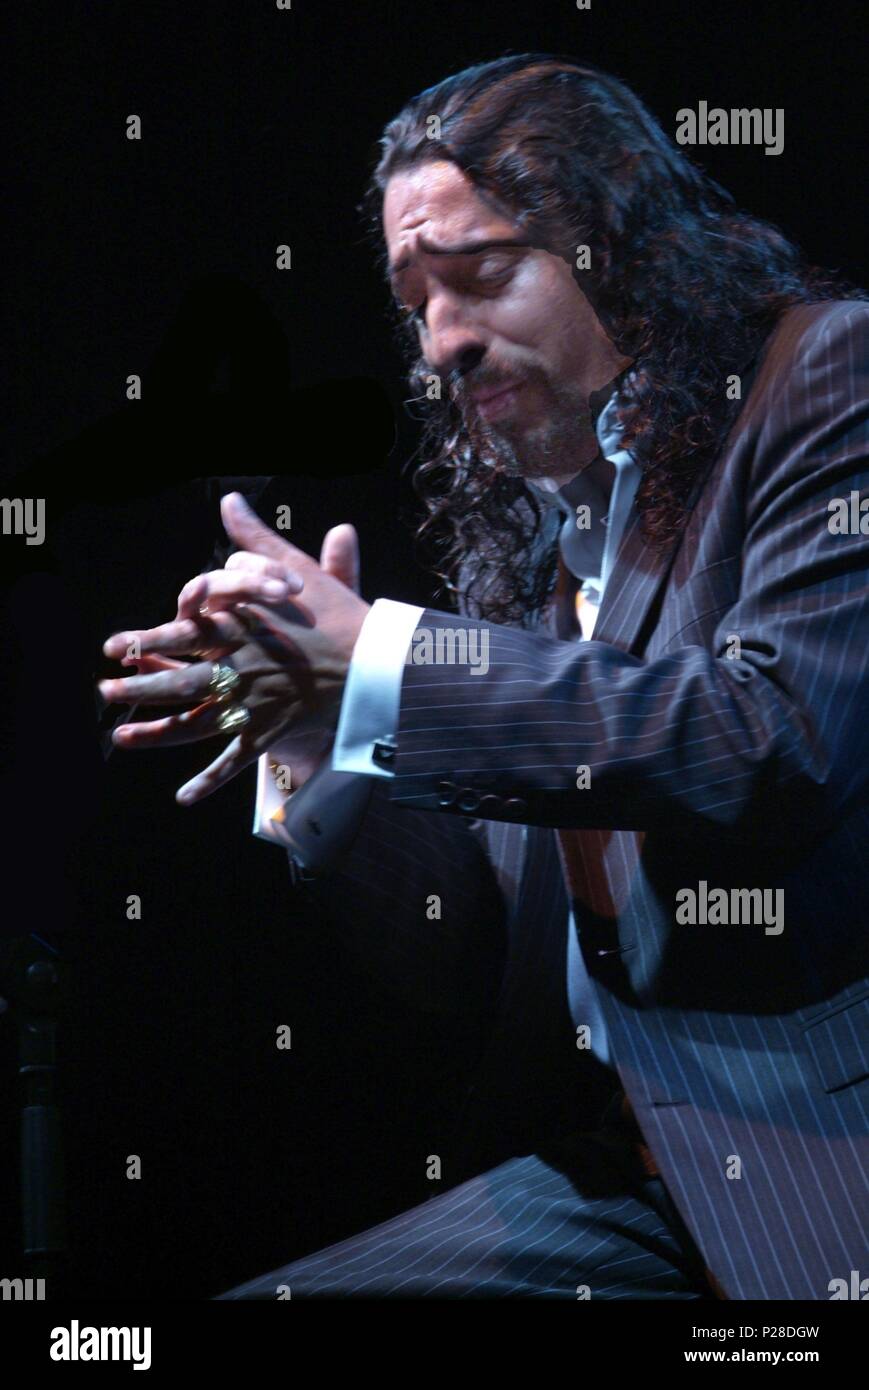 The Spanish Flamenco Singer Diego El Cigala During A Concert Stock